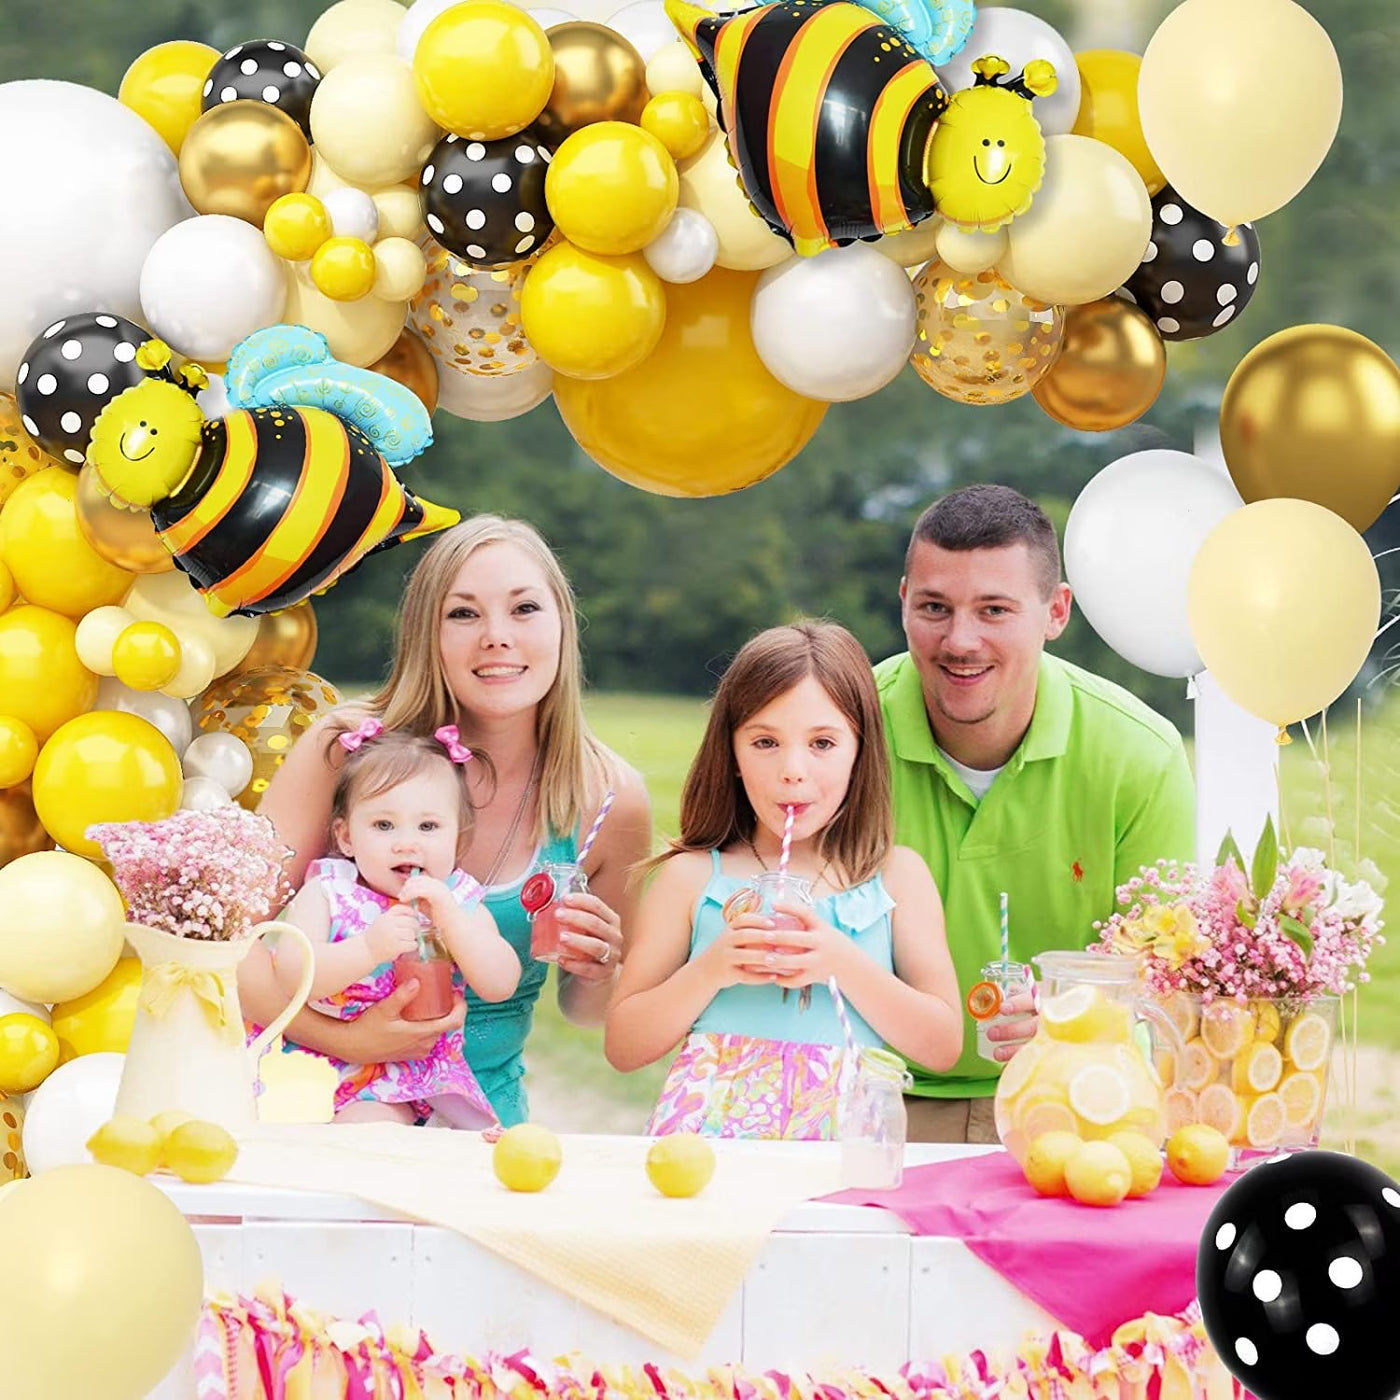 Bee Balloon Arch Garland contains everything you need to make a summer garland. This is a great idea for Easter and summer-themed events, Gender reveals, birthday parties, baby showers, graduation parties, and anything summer-related!